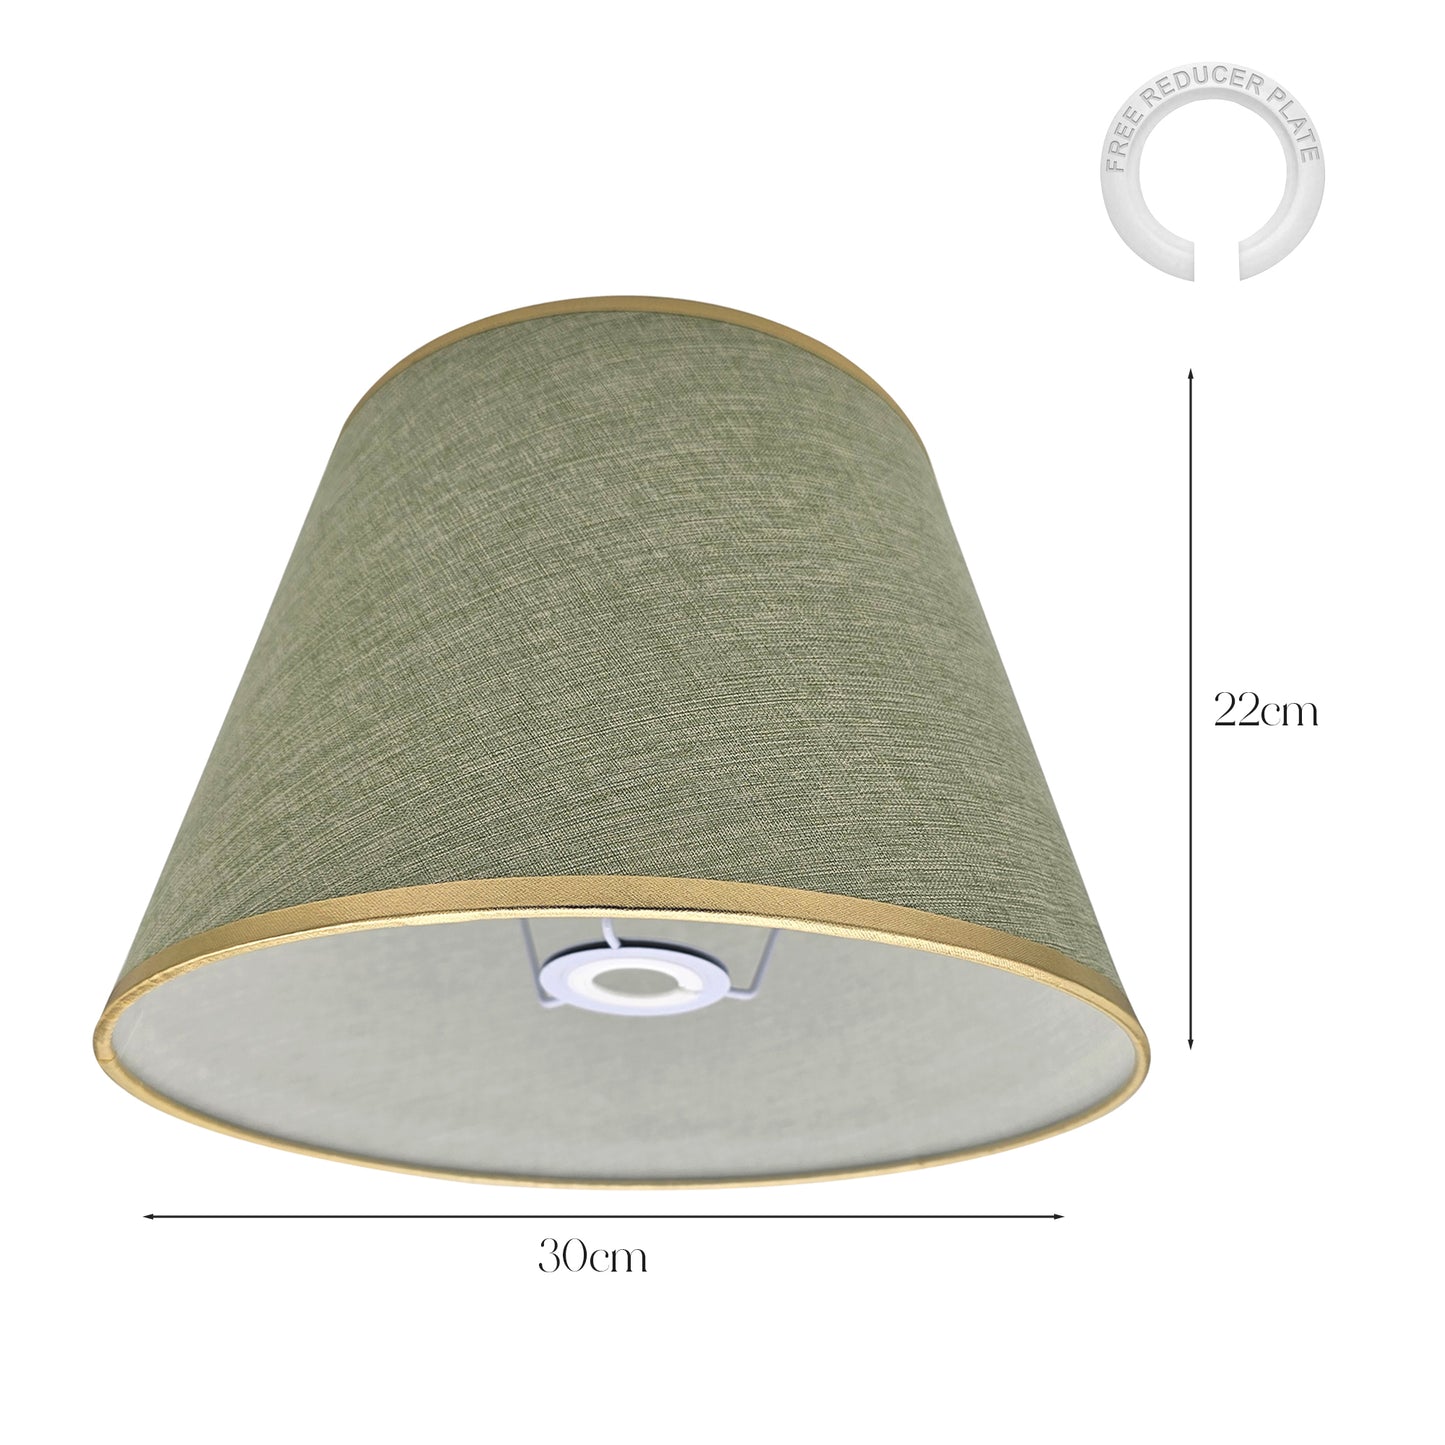 Bedside Tables with Light Desk Lamps and Linen Accents - Size